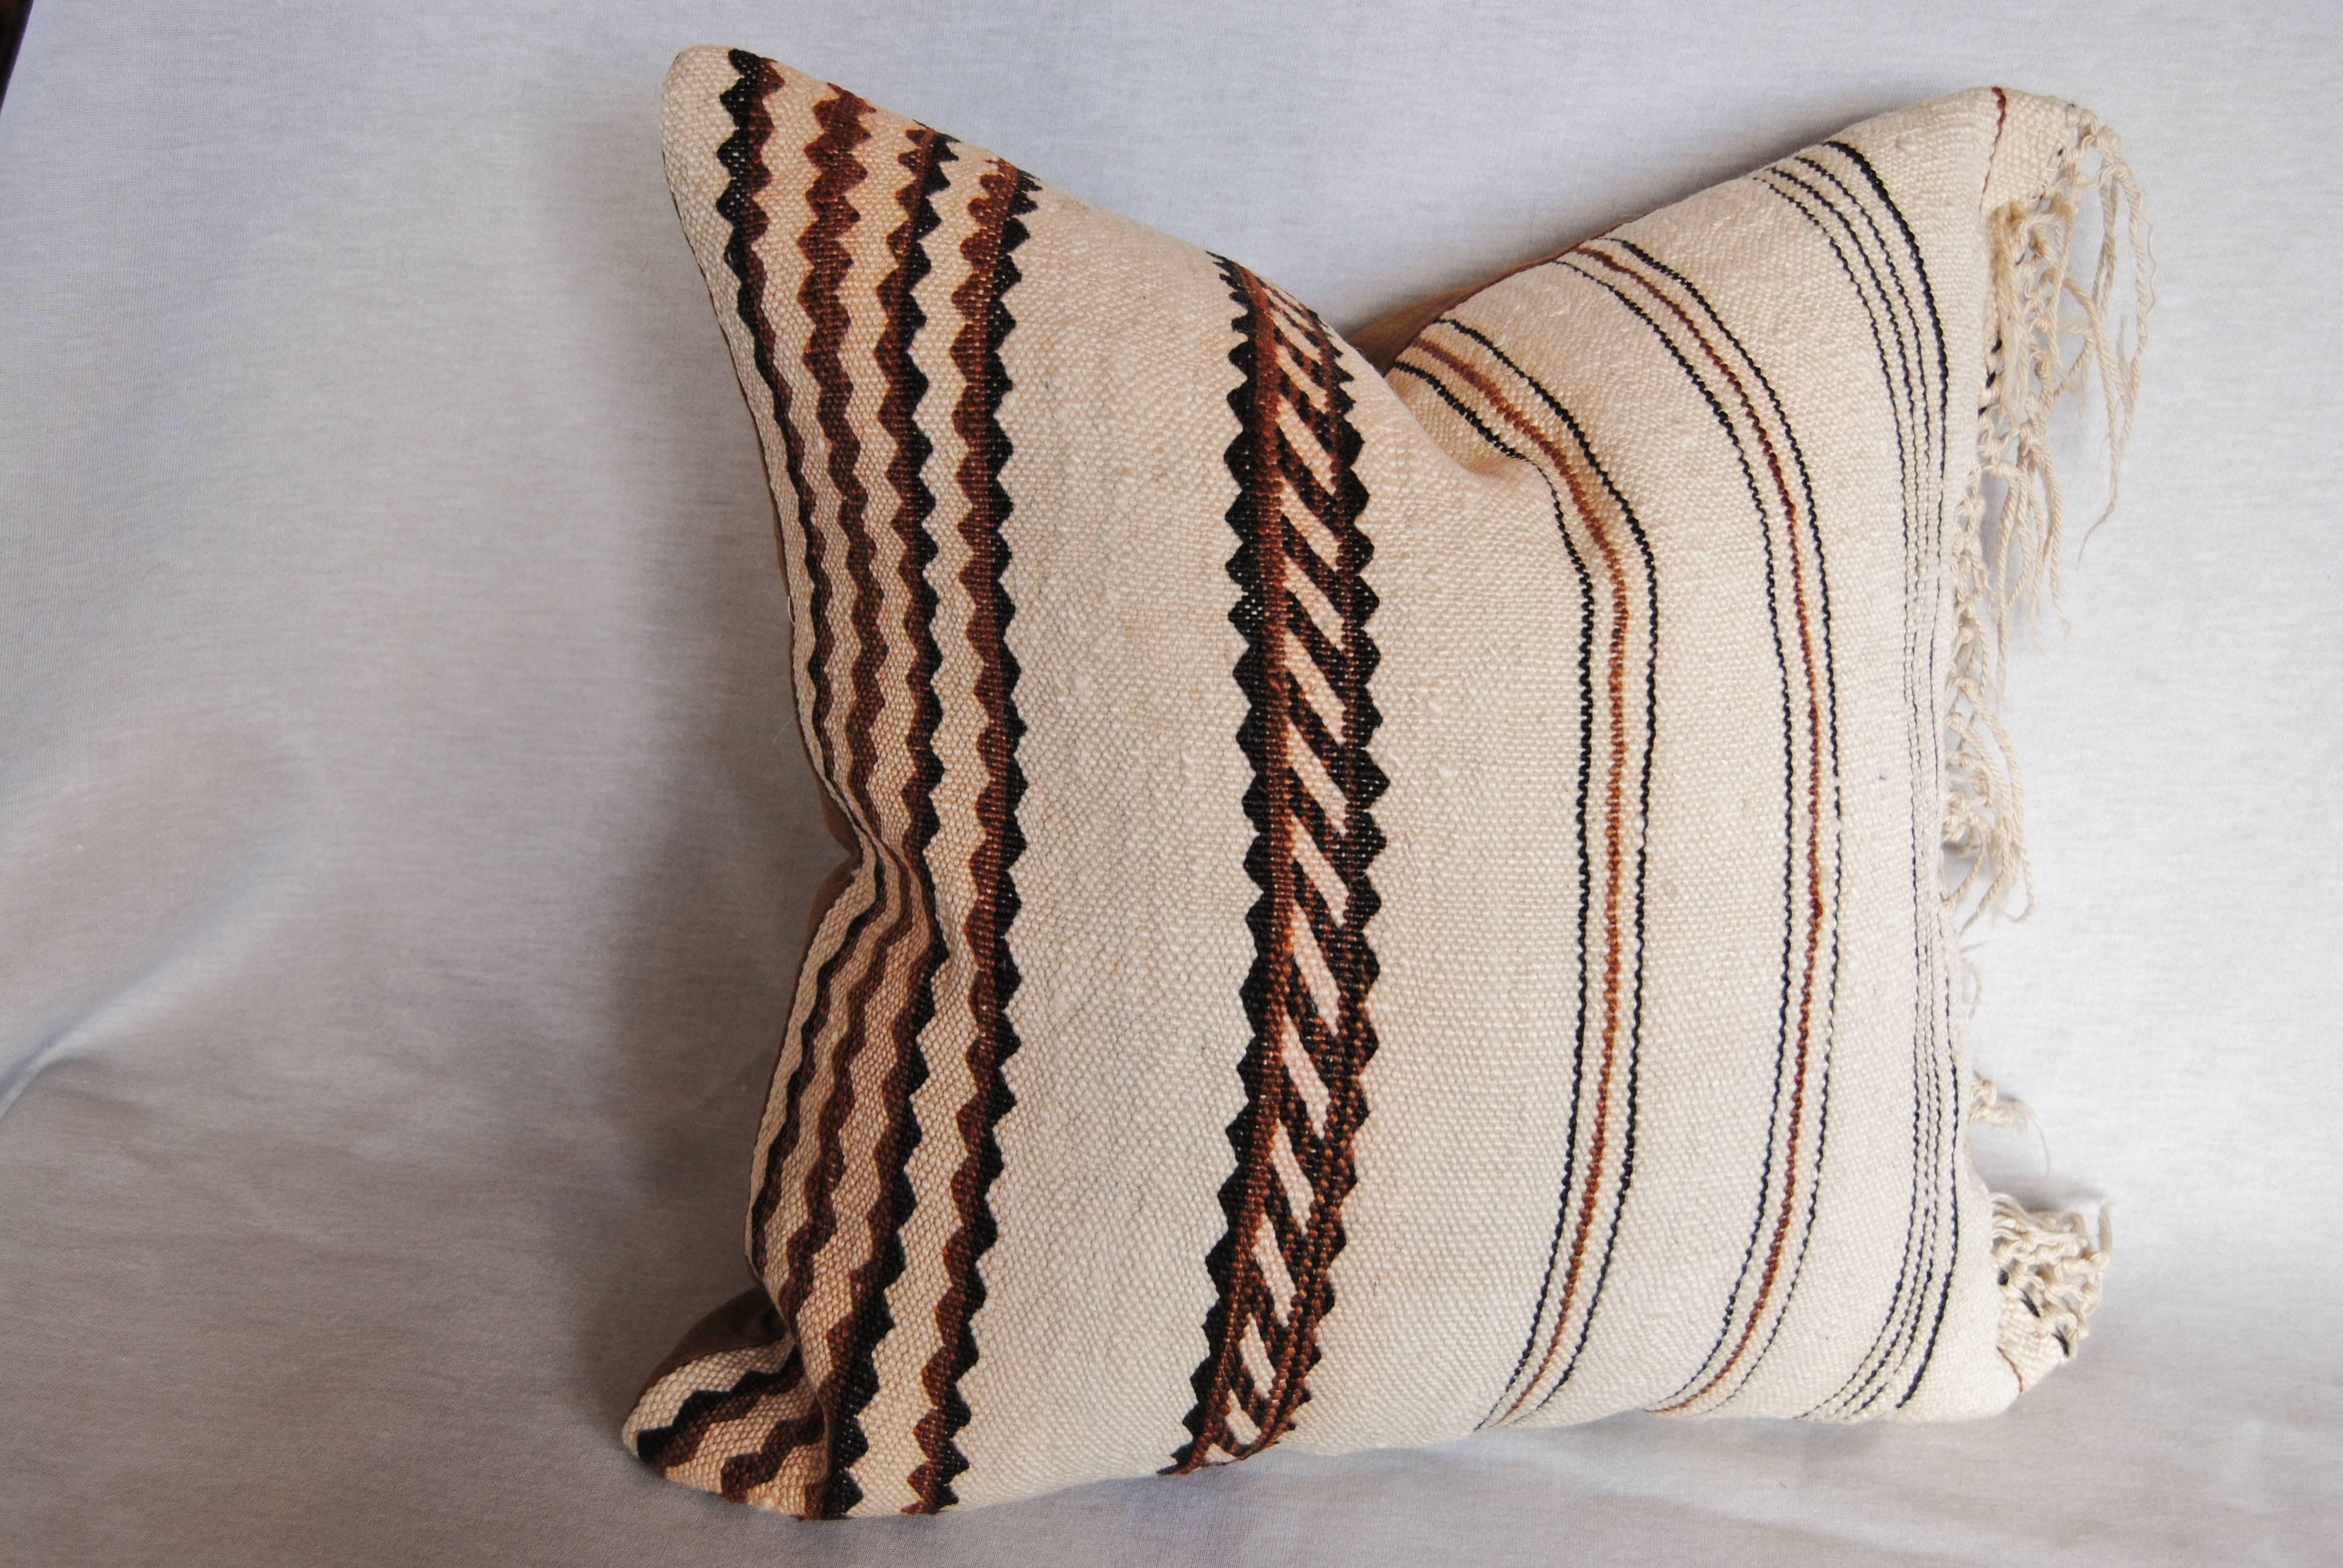 Custom pillow cut from a vintage hand loomed wool Moroccan Berber rug from the Atlas Mountains. The textile is soft and lustrous with natural color. The pillow is incorporates the original fringe from the rug, missing a few strands, but still in